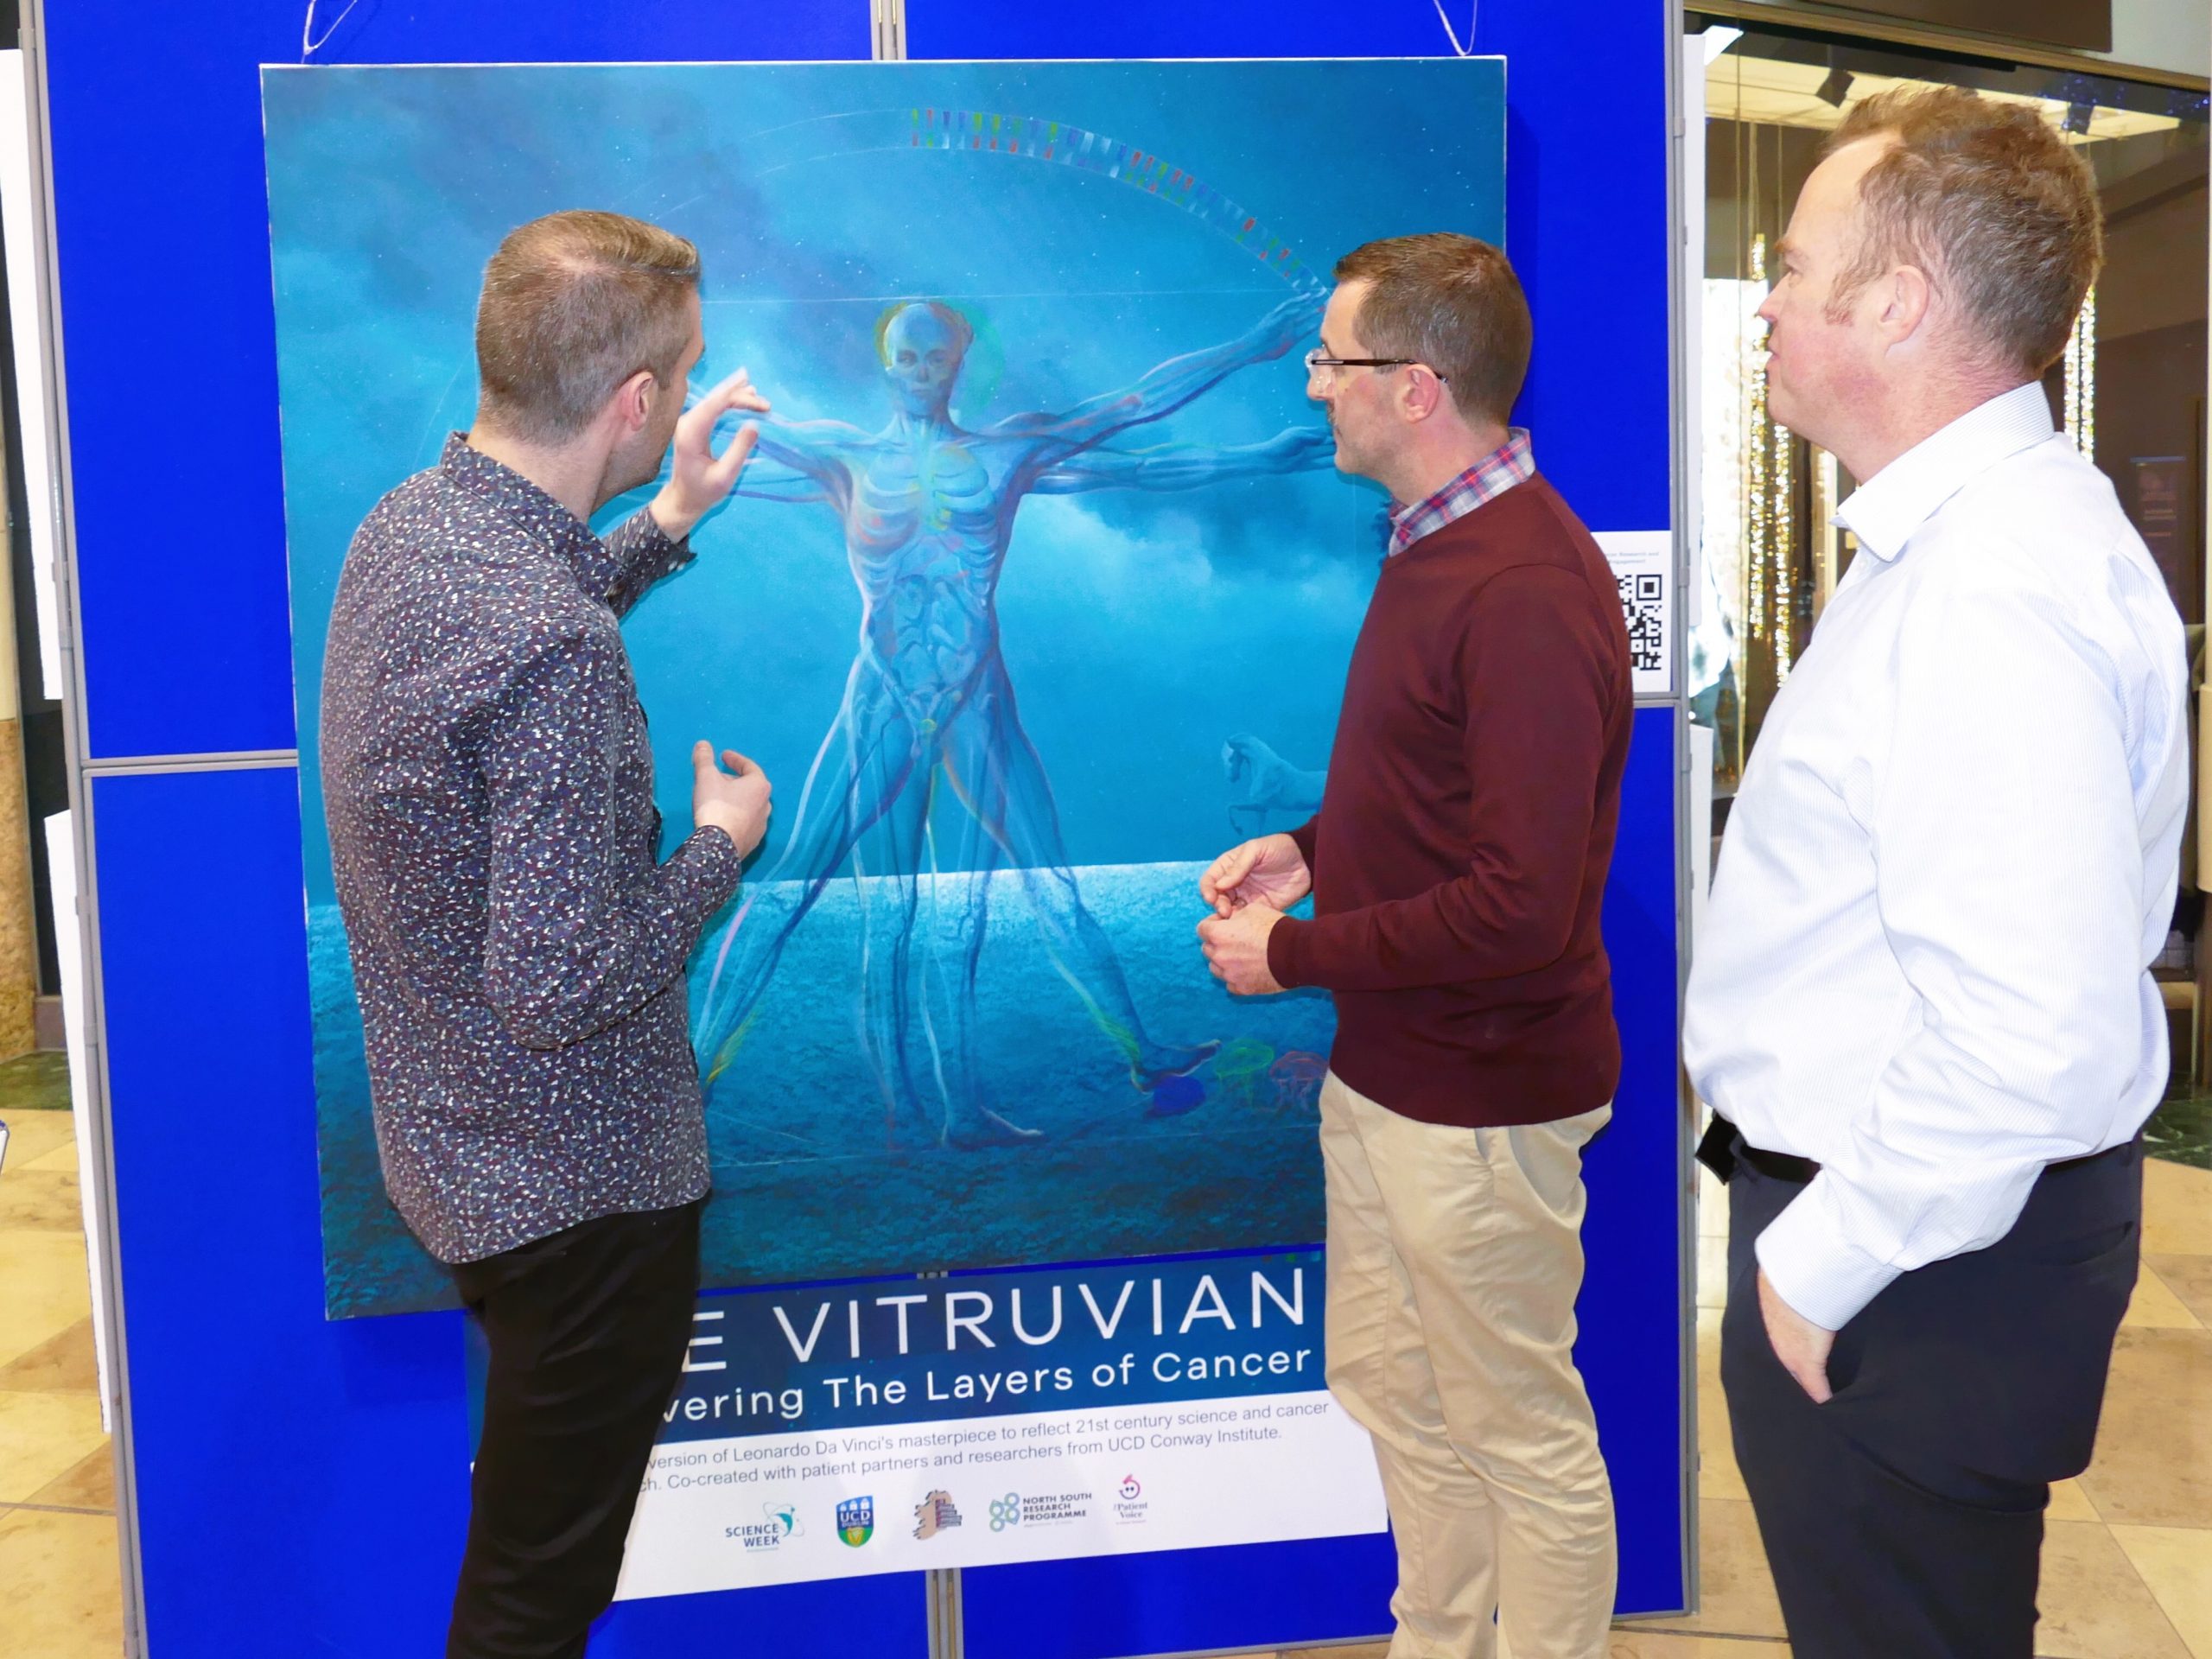 L-R: The artist Vincent Devine, who has reimagined Leonardo da Vinci’s ‘Vitruvian Man’ to celebrate the cancer research taking place at the All-Island Cancer Research Institute, with Cathal Nolan (HSF) and Professor William Gallagher (UCD, AICRI). 